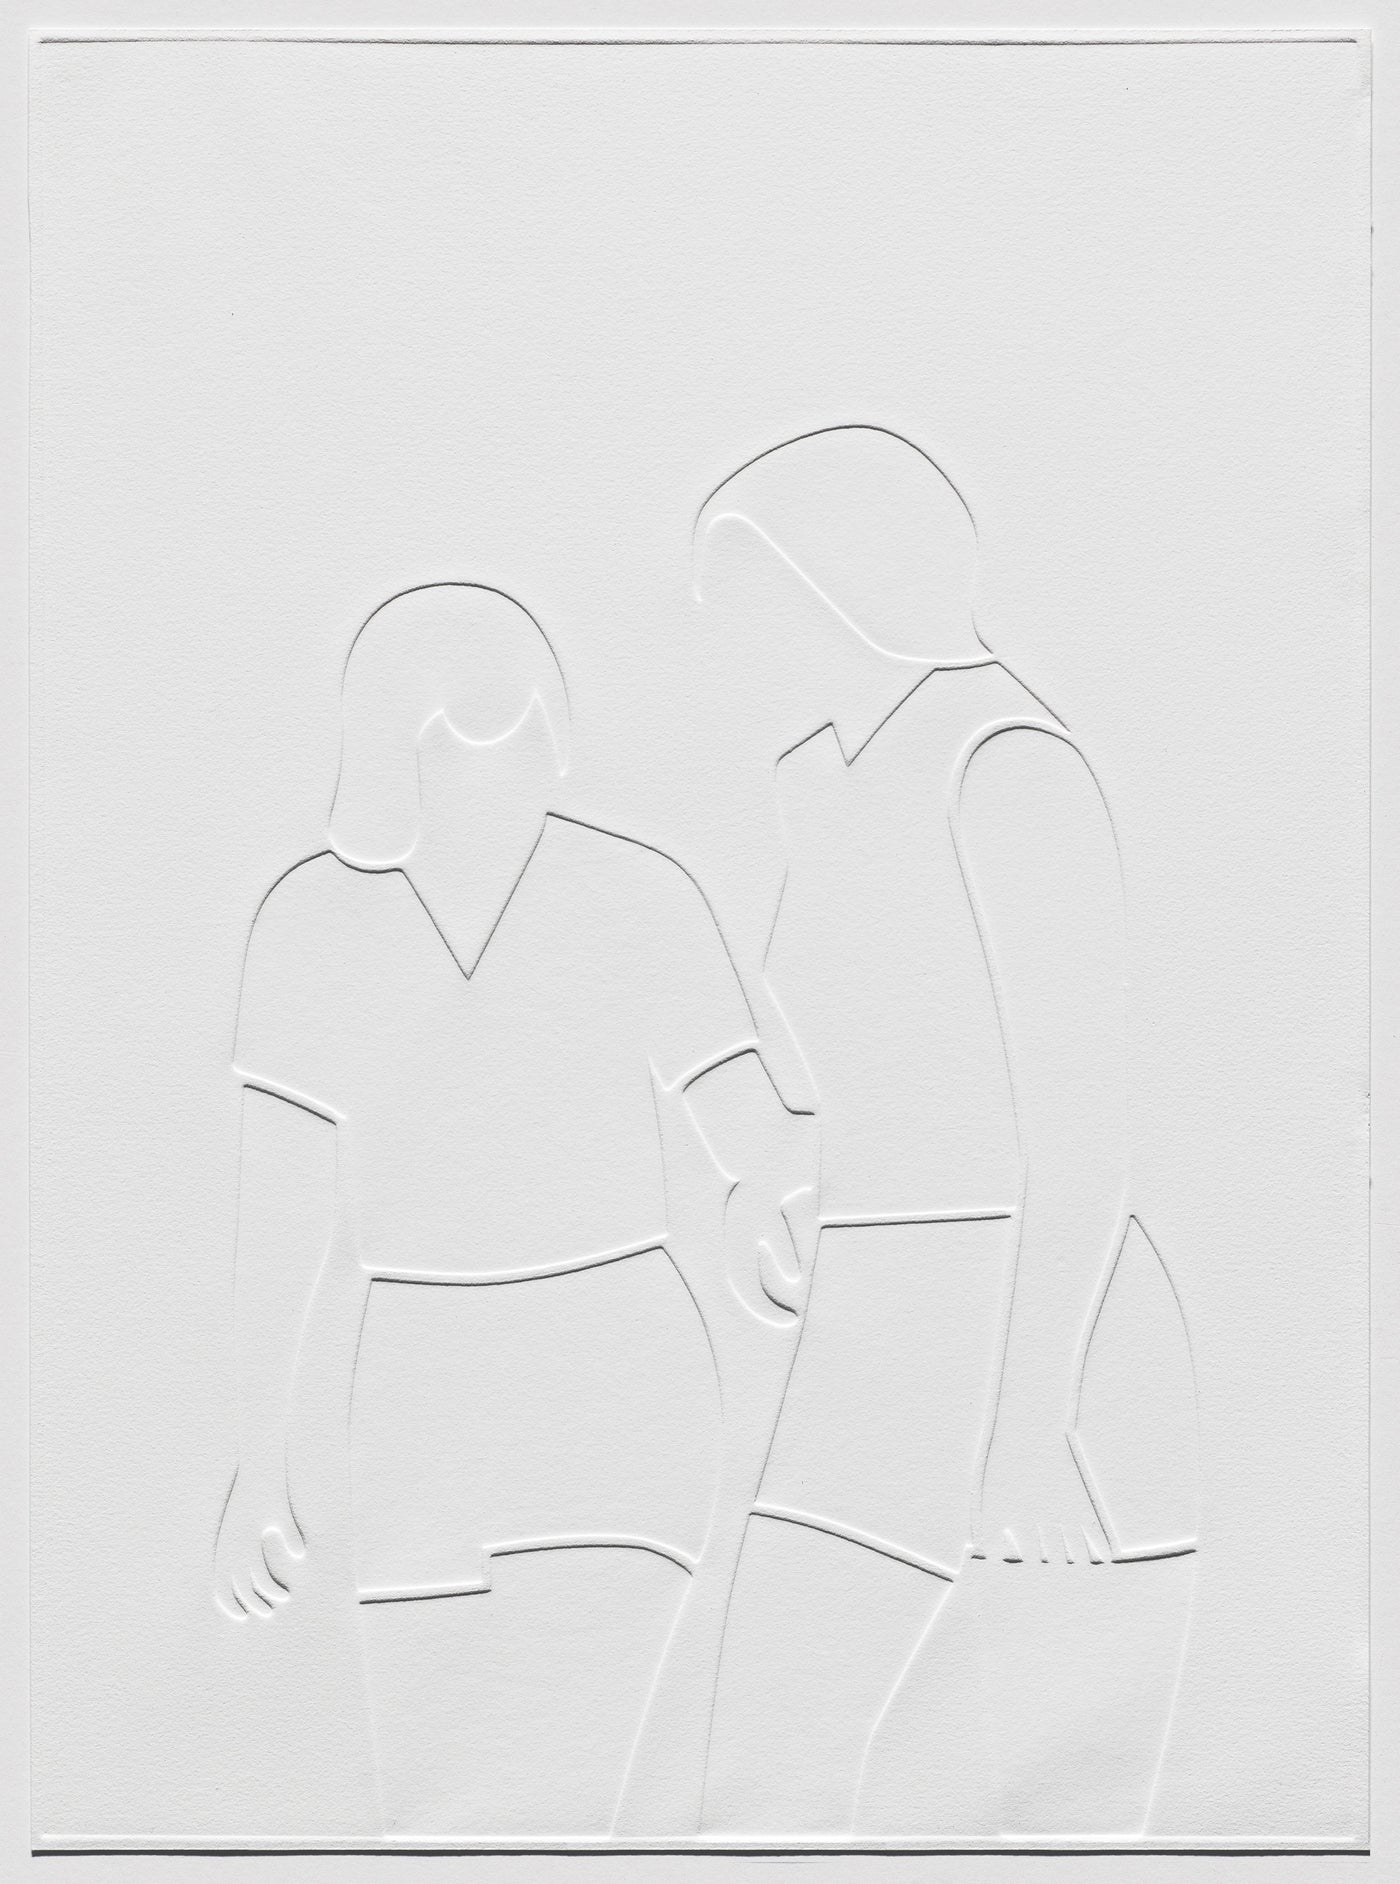 "Two Towards Touch" 19 5/8 x 14 1/4”, debossed relief print on BFK Rives white 280gsm, 2022